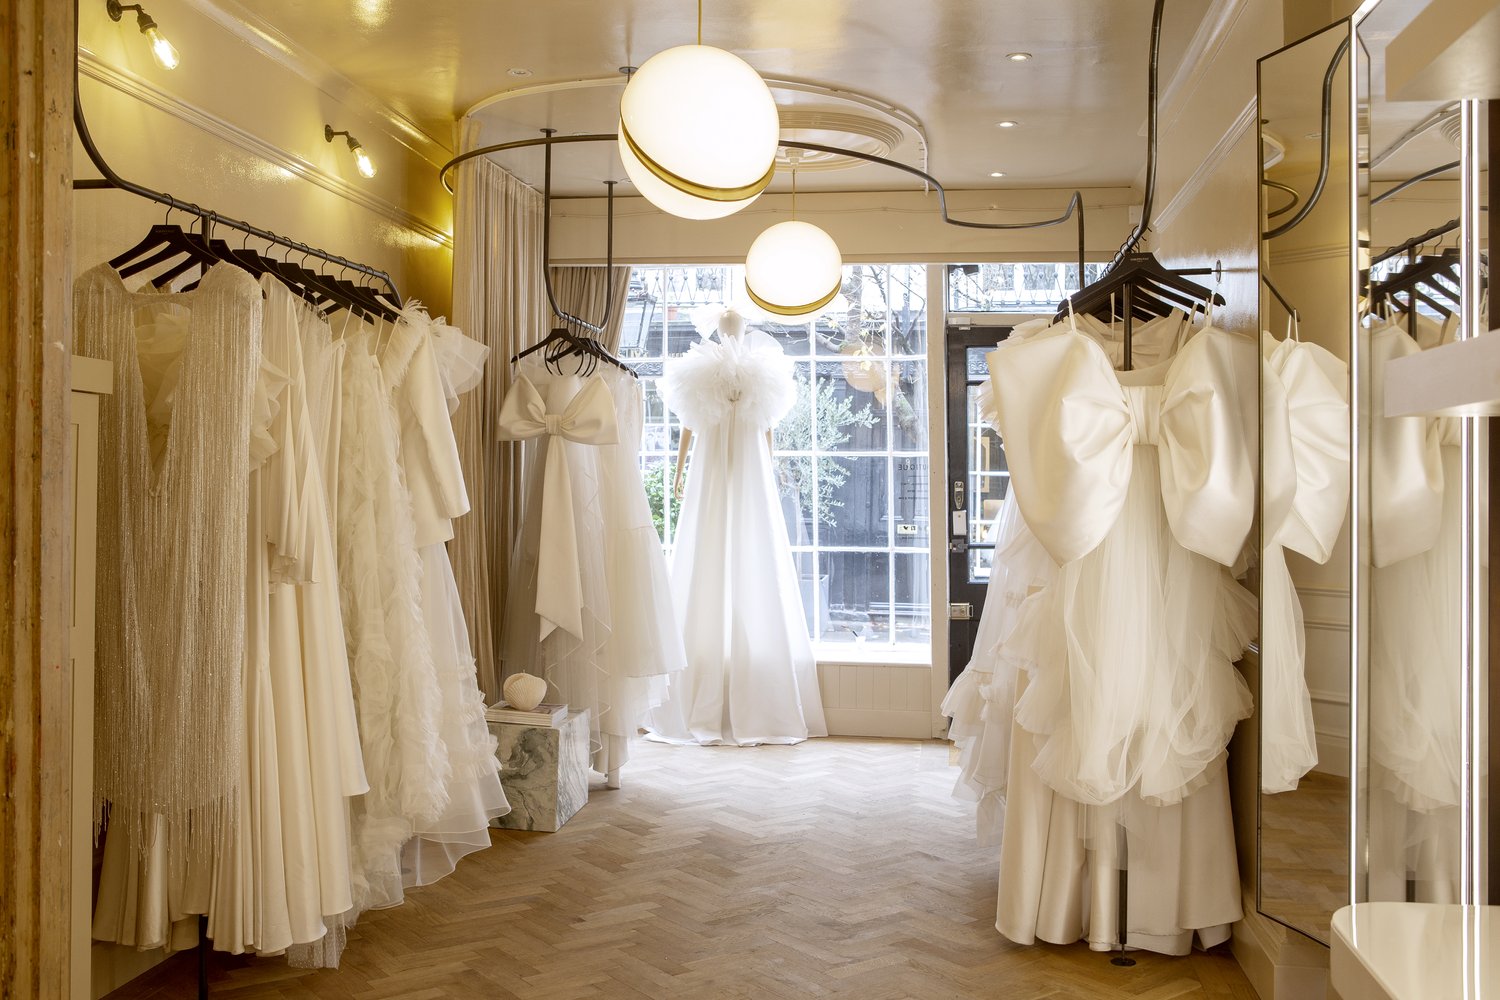 Halfpenny London Wedding dresses and separates in London